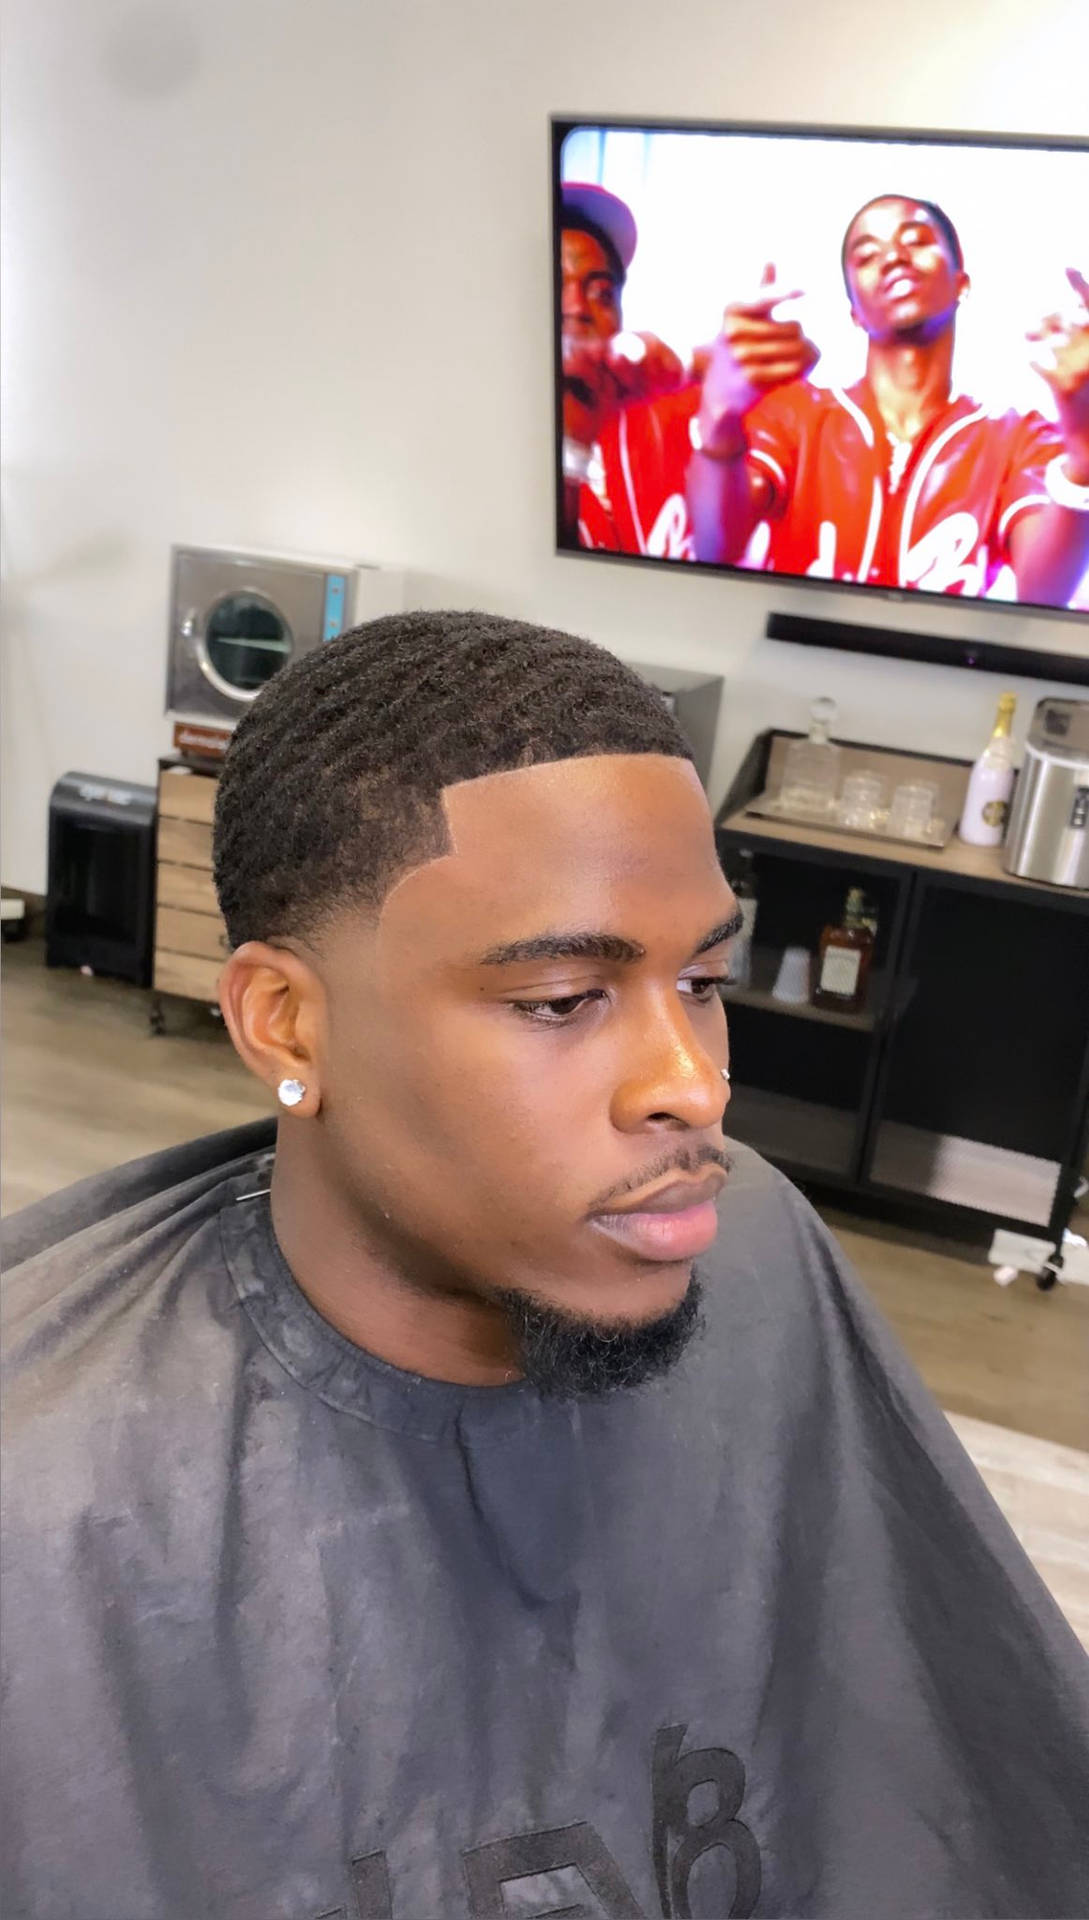 Insta-famous Swavy Lee Flaunting His Signature Hairstyle Background